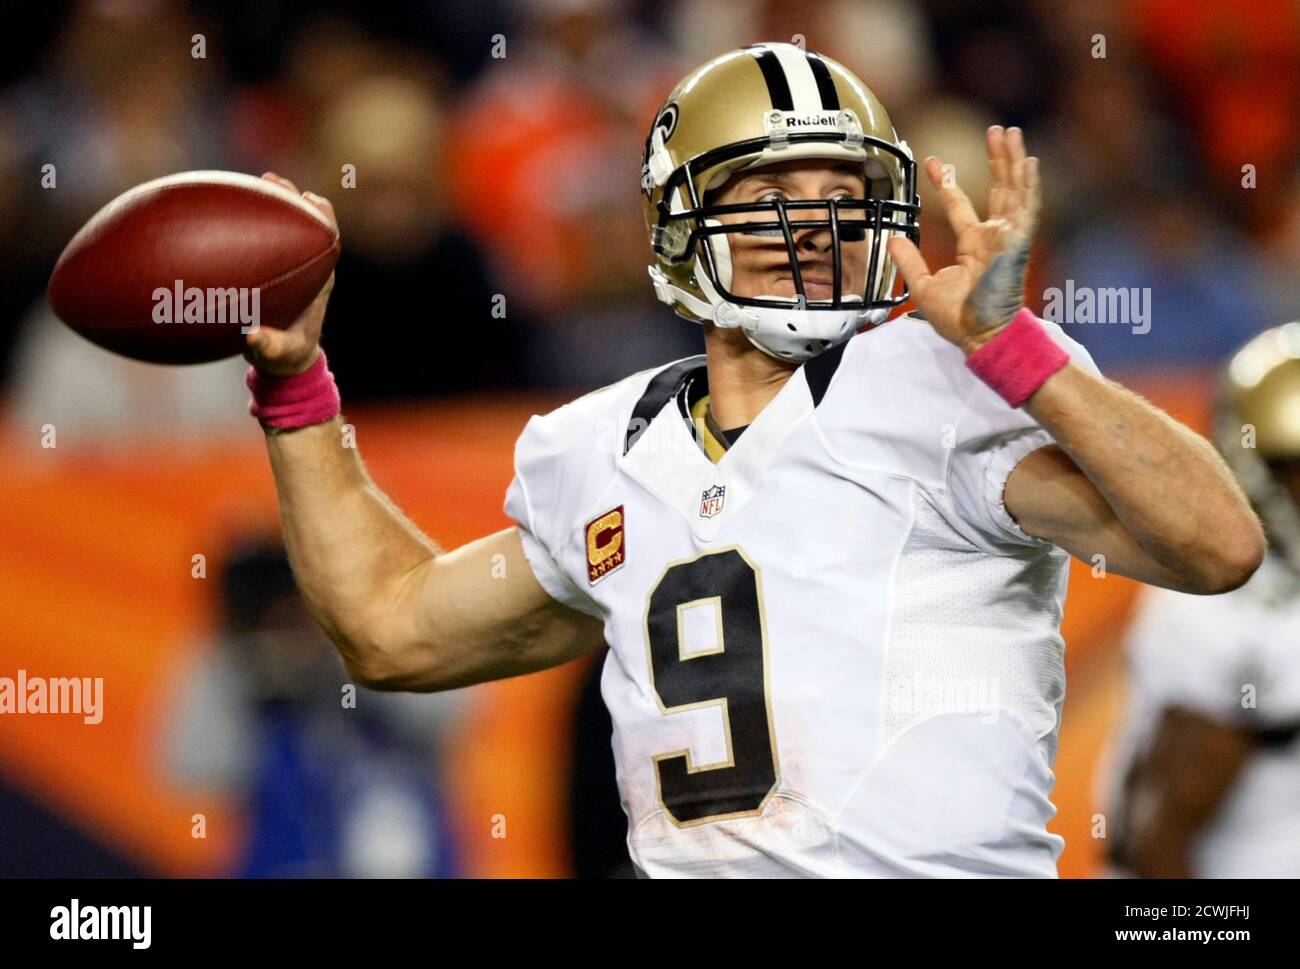 New Orleans Saints quarterback Drew Brees throws against the Denver Broncos in the second quarter in their NFL football game in Denver October 28, 2012.  REUTERS/Rick Wilking (UNITED STATES - Tags: SPORT FOOTBALL) Stock Photo